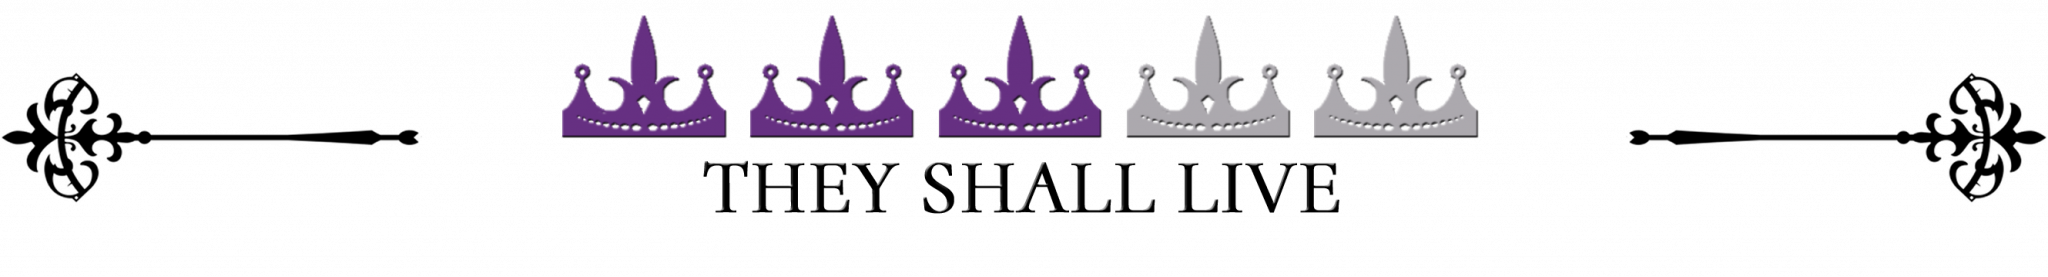 They Shall Live - 3 Crowns